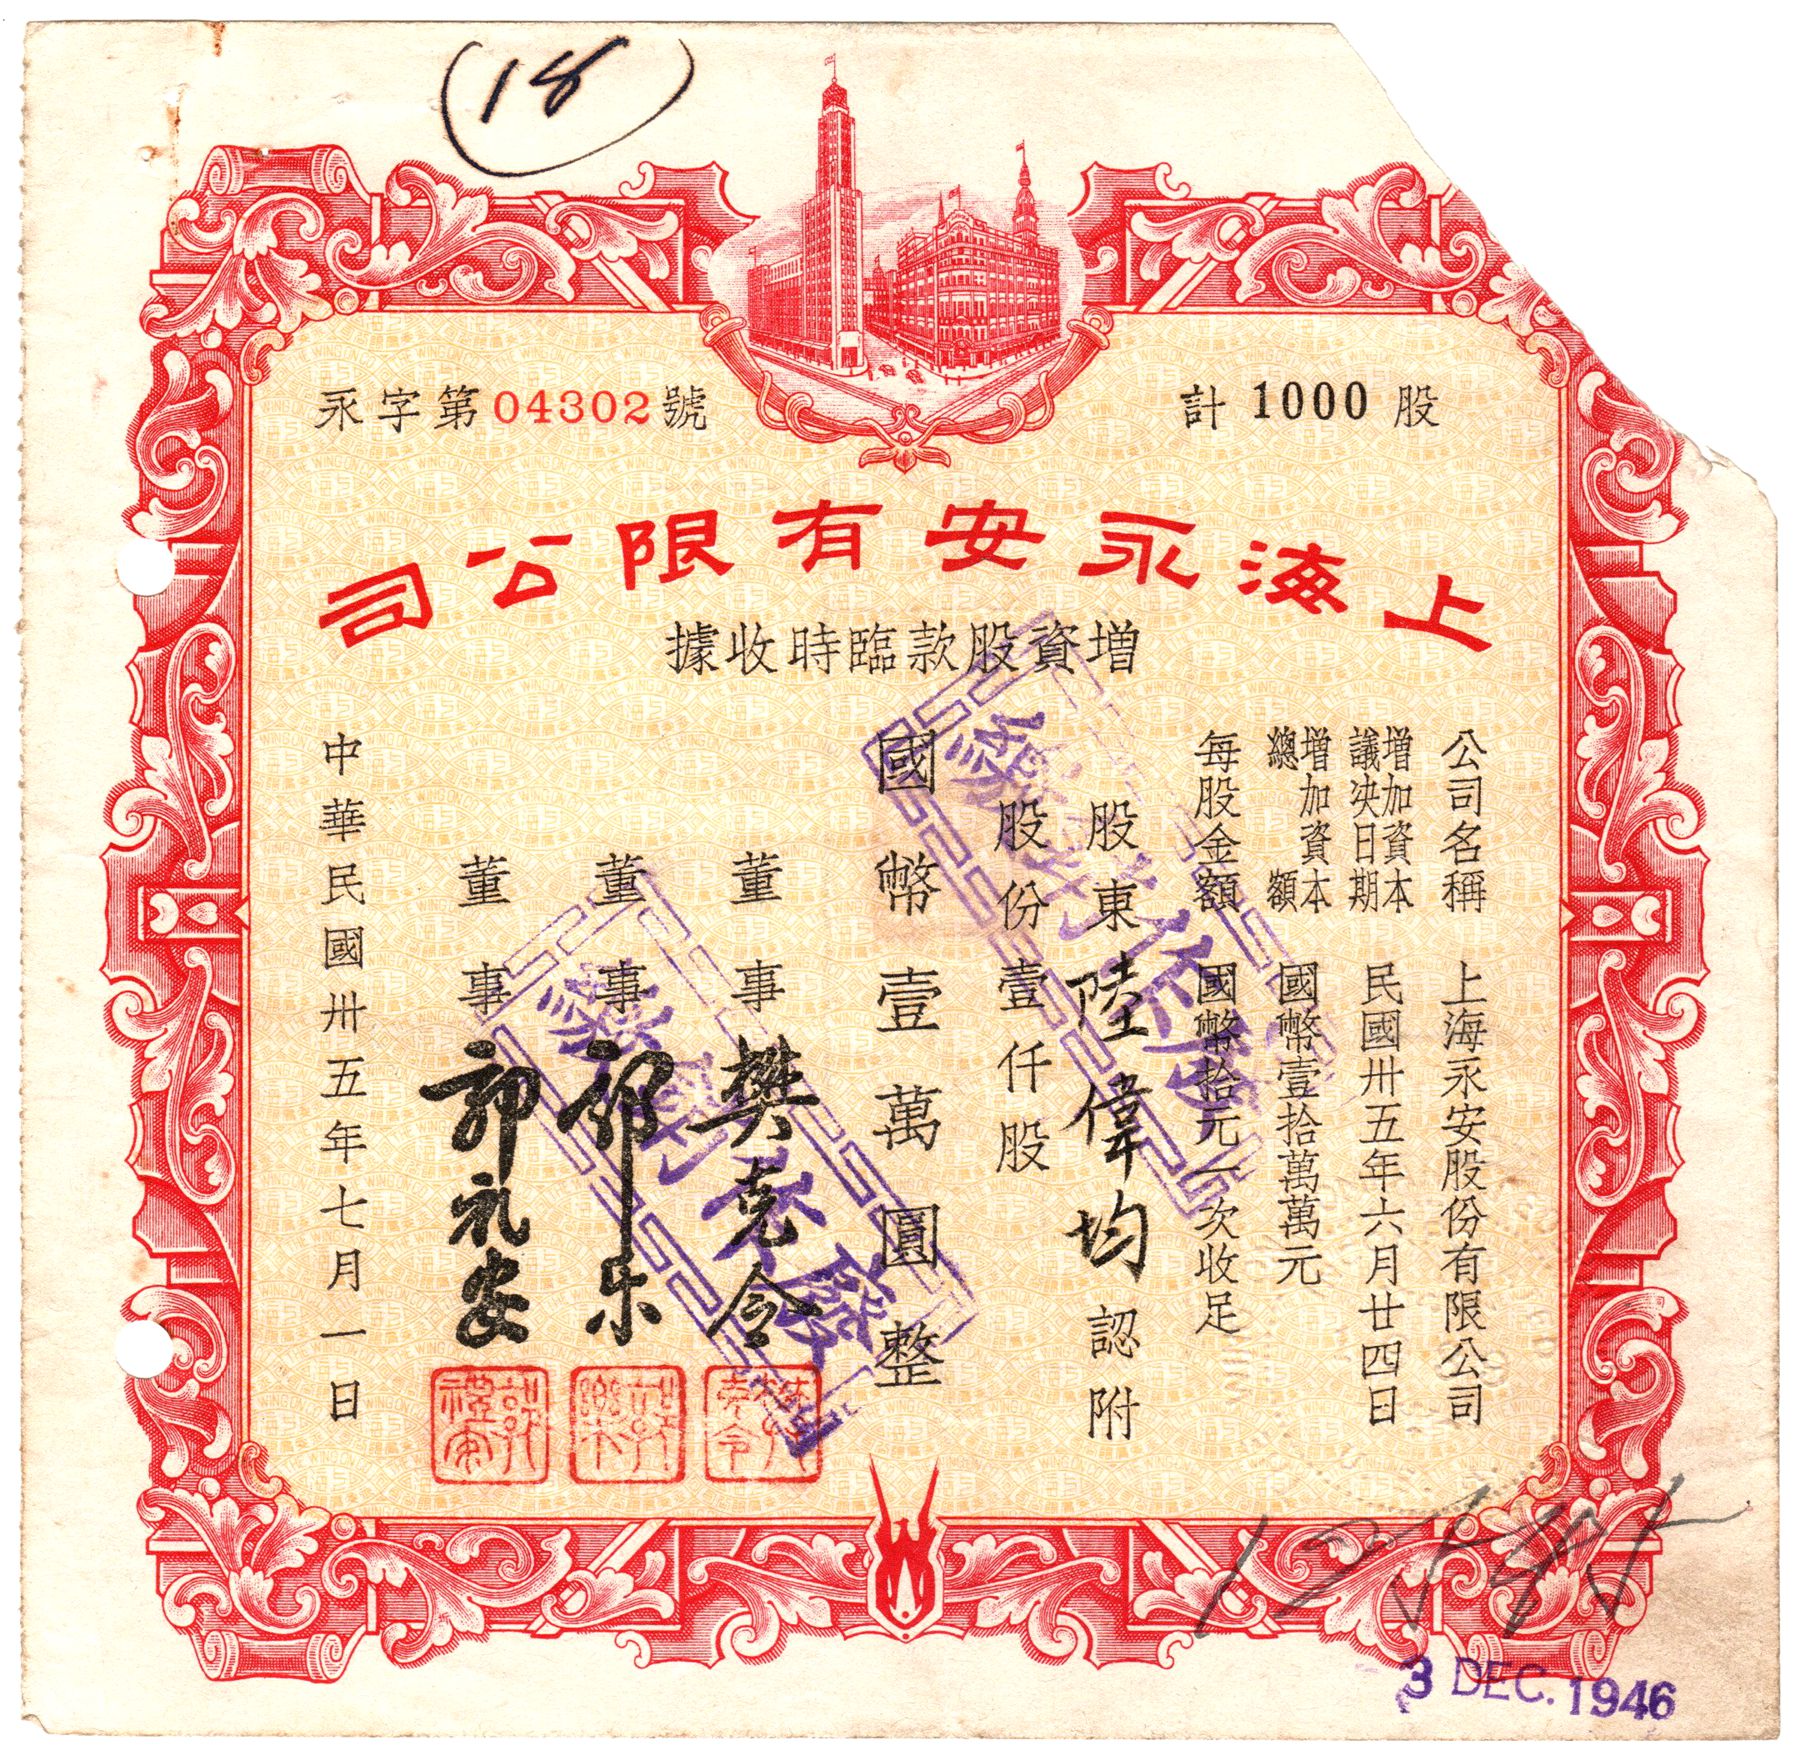 S1152, Wing-On Company Federal Inc, Stock Certificate 1947, Shanghai